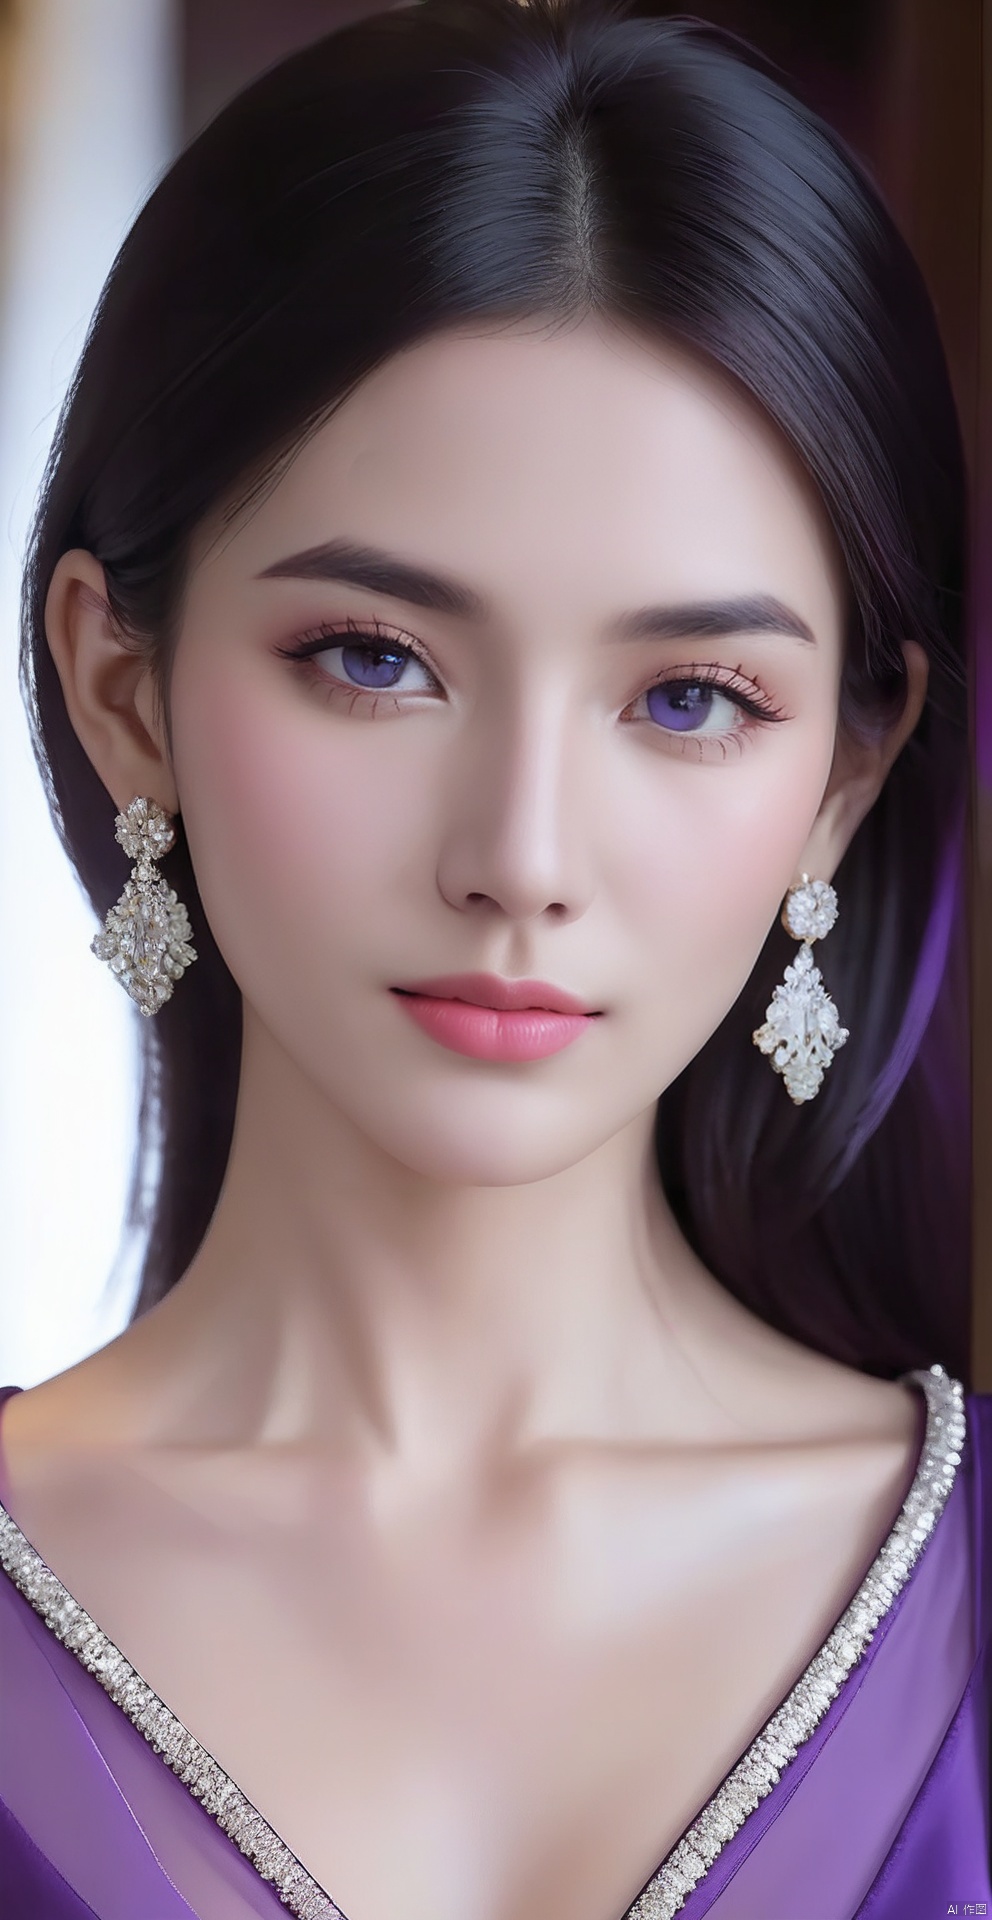 8k,RAW, Fujifilm XT3, masterpiece, best quality, photorealistic of 1girl ,solo, diamond stud earrings, long straight black hair, hazel eyes, serious expression, slender figure, wearing a purple blouse,masterpiece,1girl,purple dress,(upper body shot), (full body view),best quality,long hair, black hair,purple transparent shawl,earrings,beautiful symmetrical face,in the style of elegant clothing,skin white and smooth,high heels,g007,